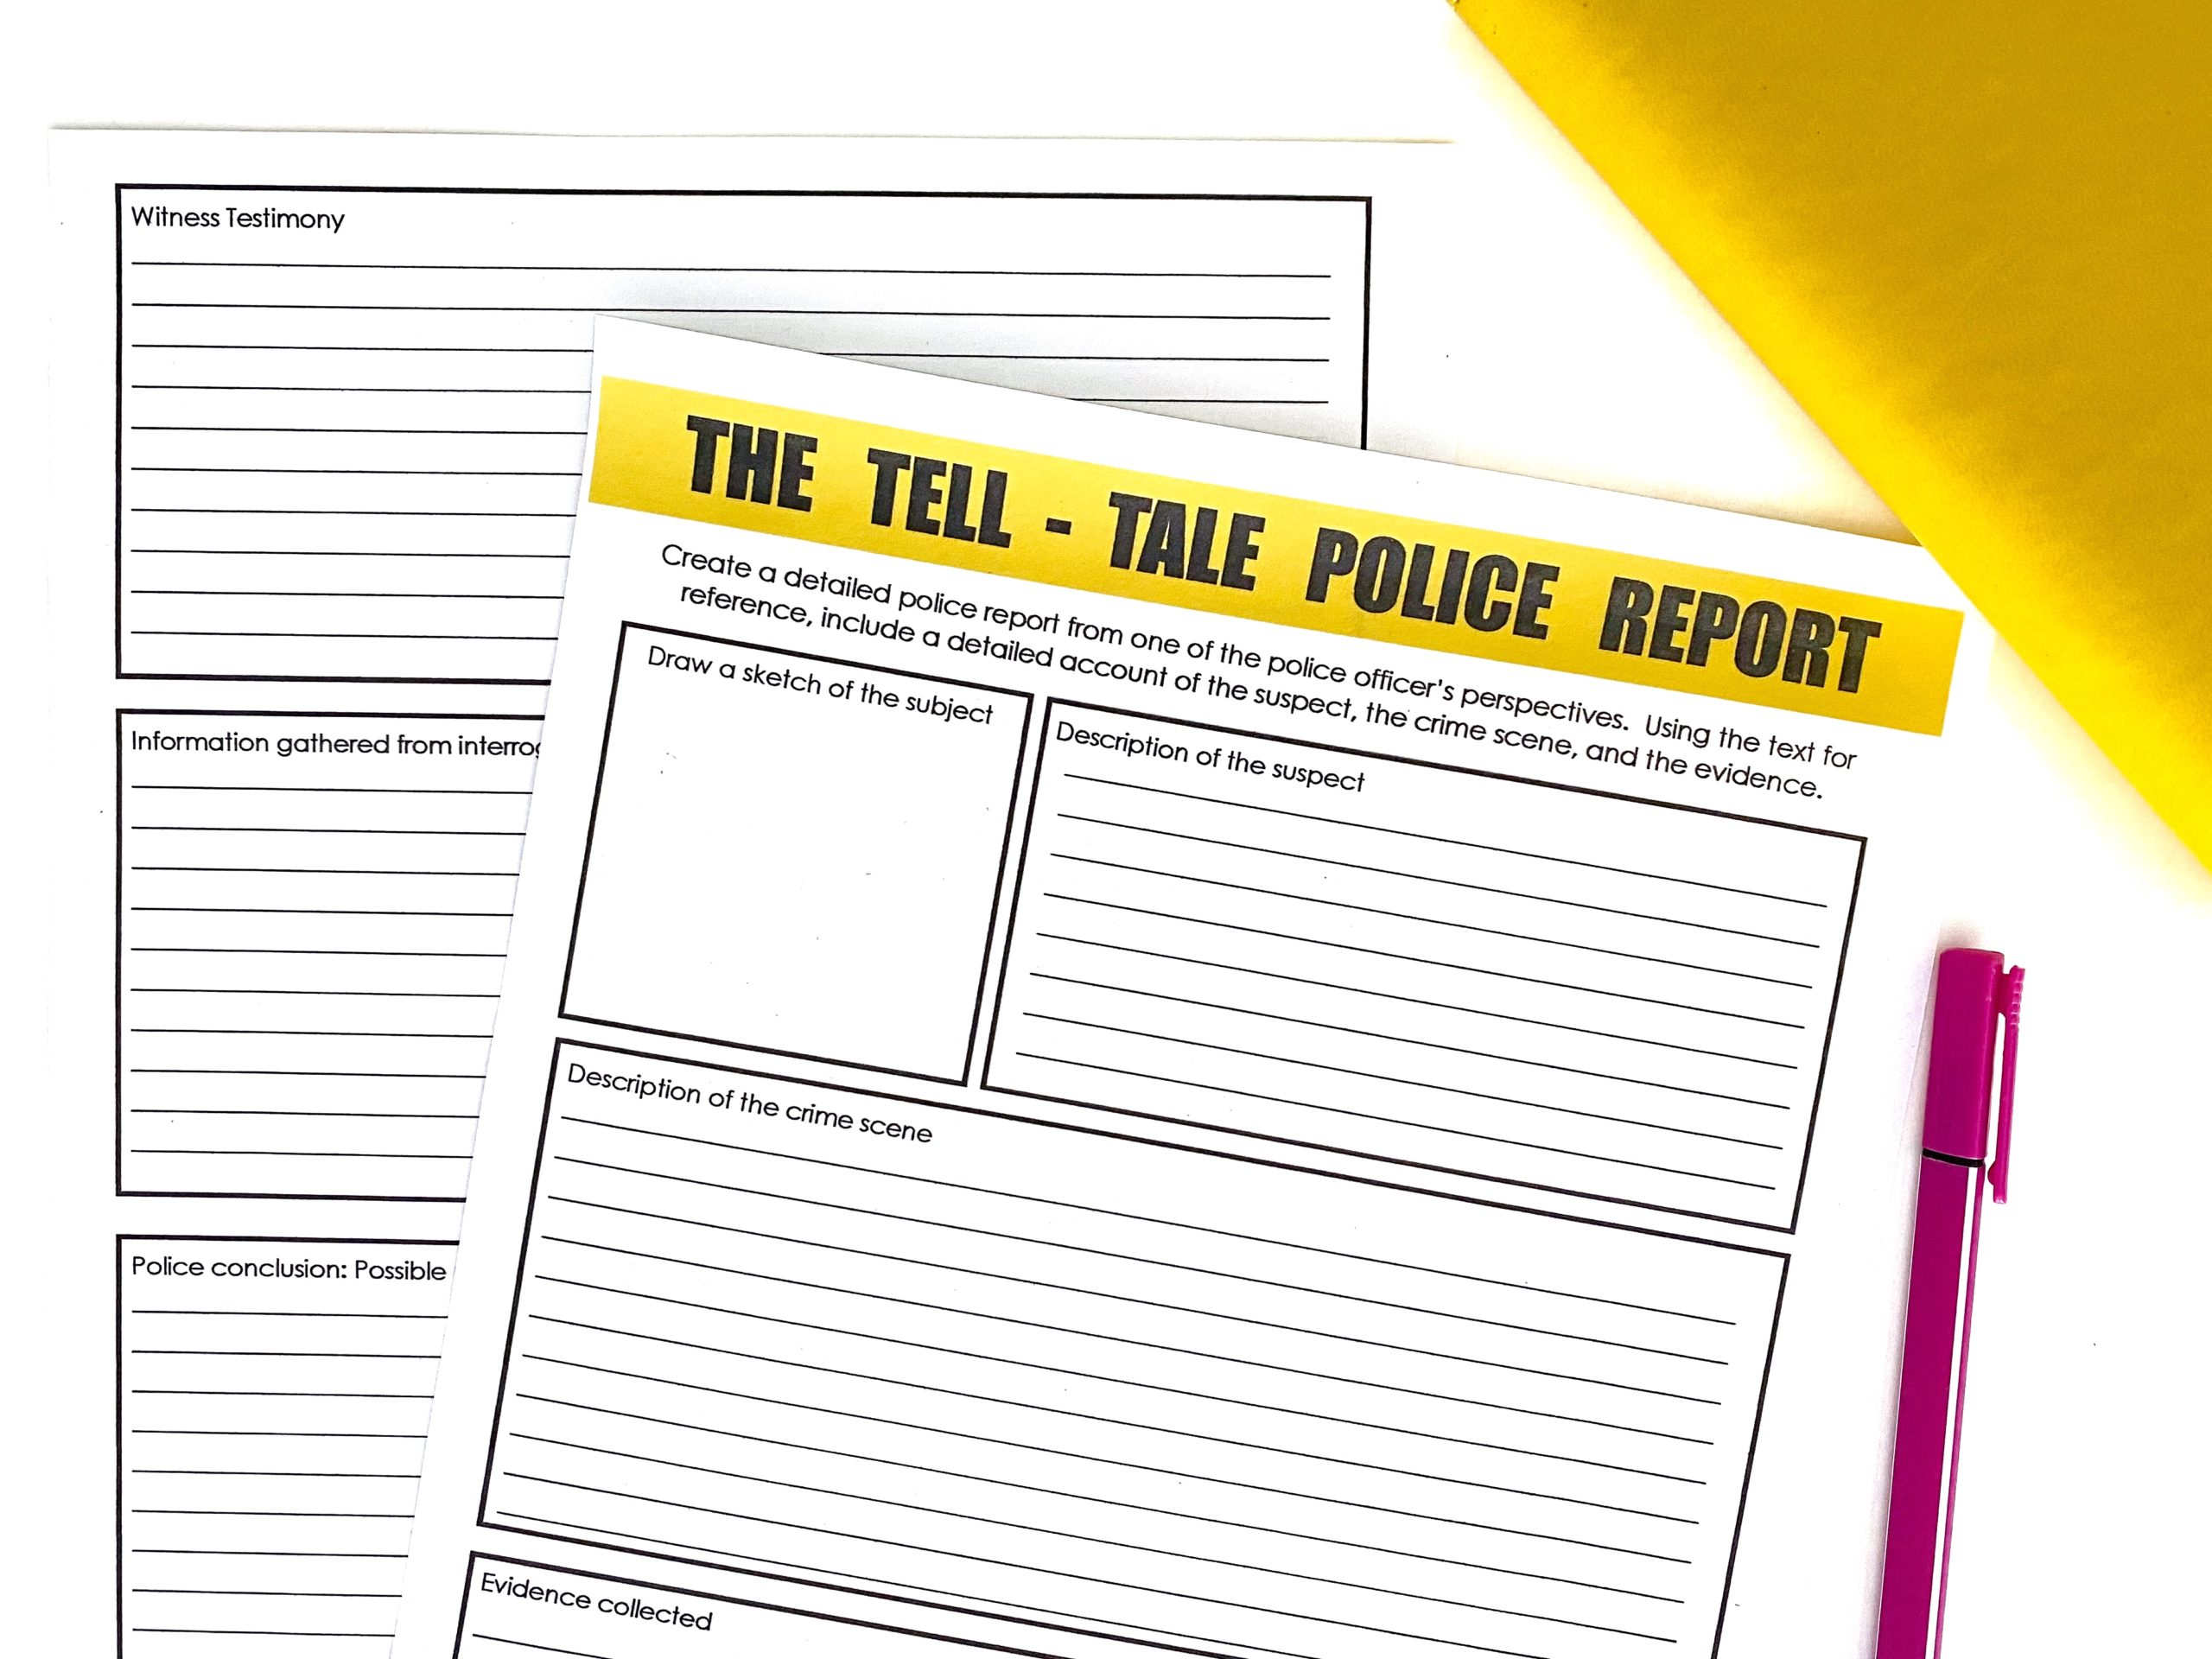 Police Report Choice Activity for The Tell Tale Heart